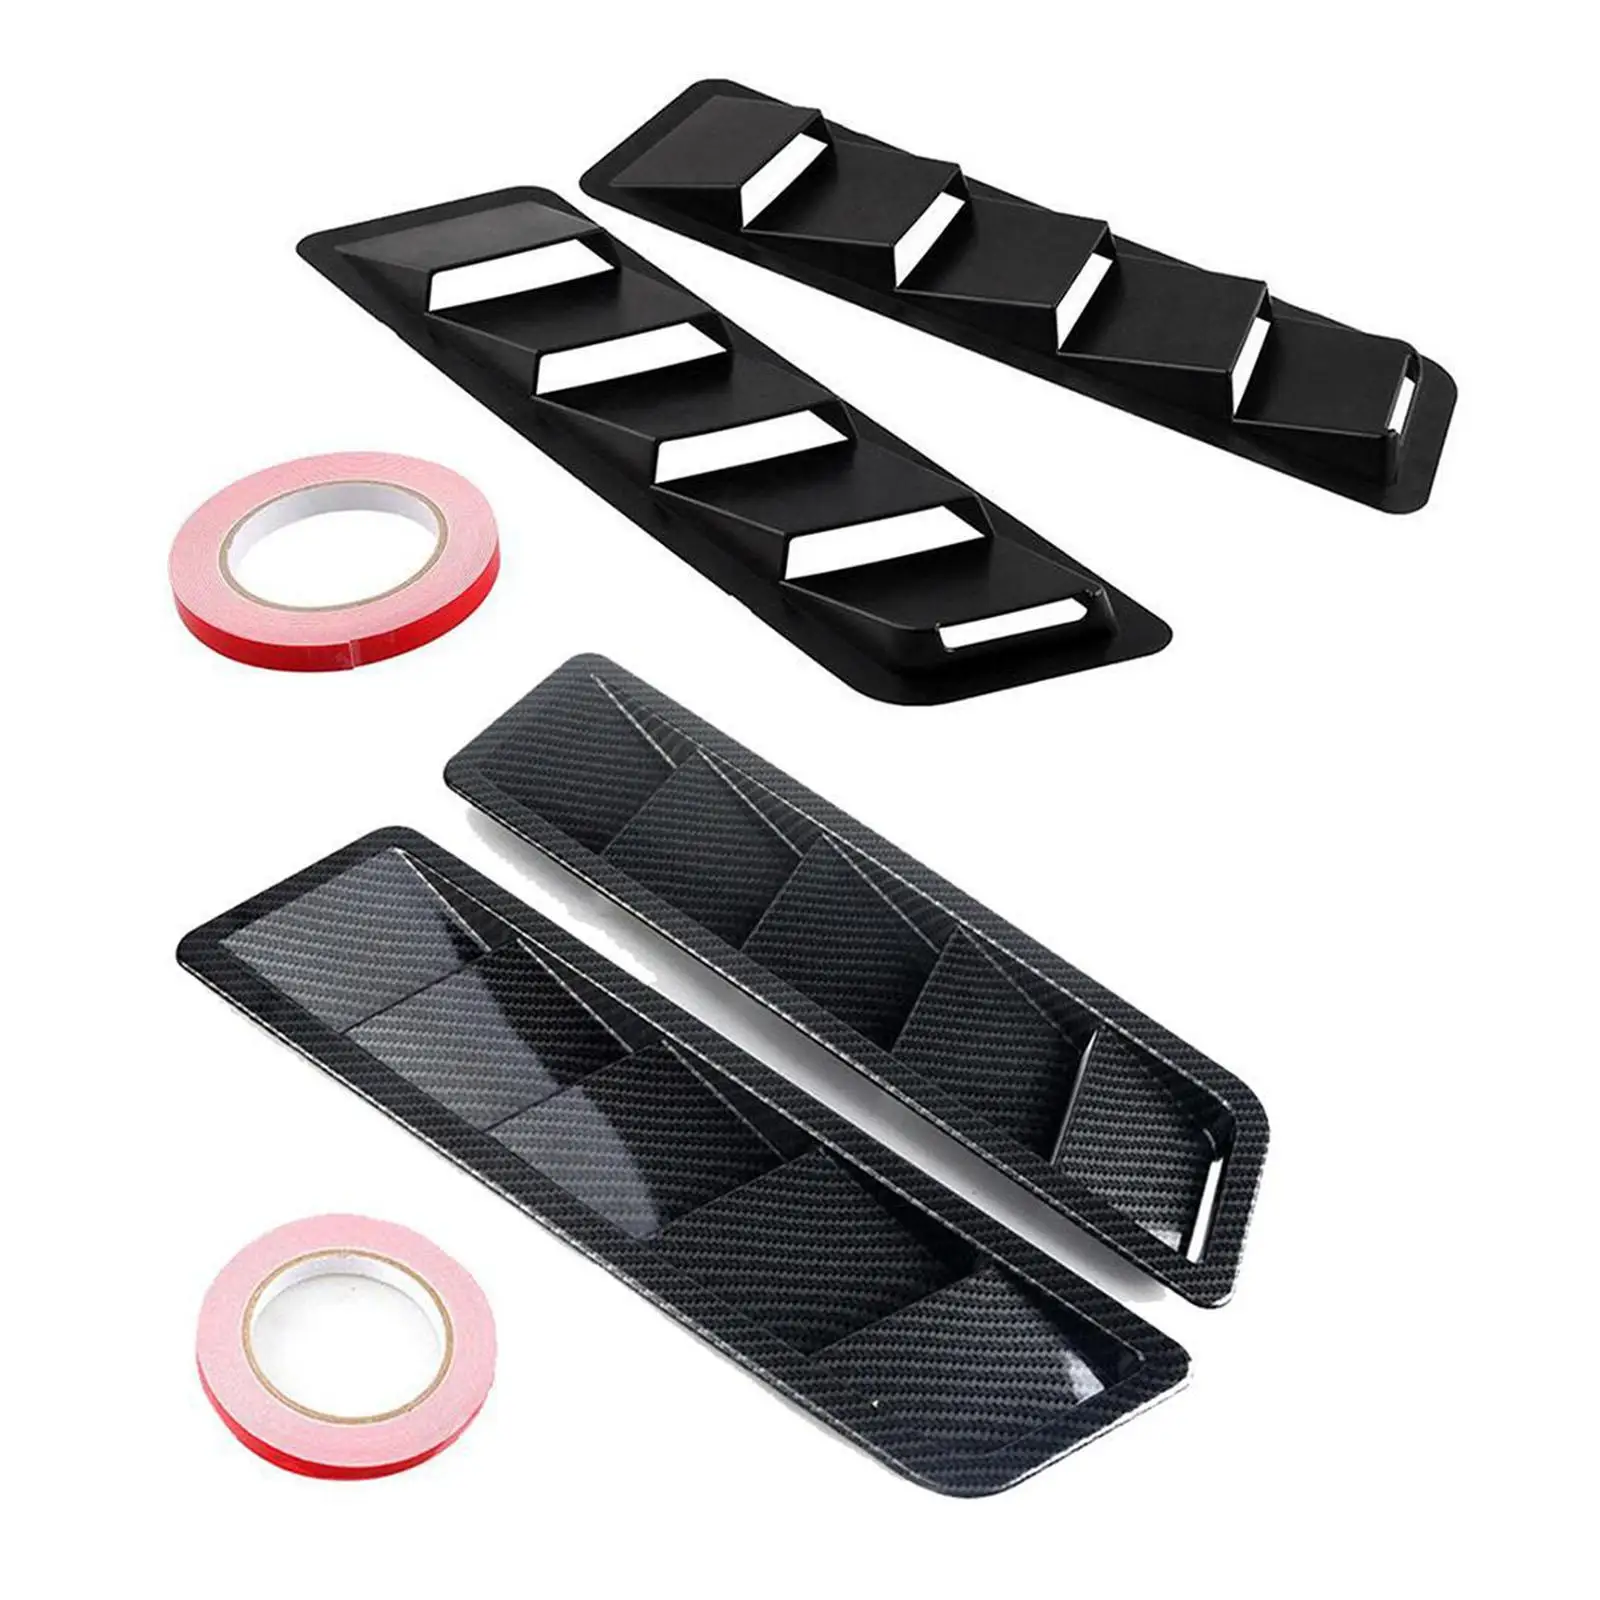 Car Hood Vent Kit Cooling Intakes Cold Louver Universial Auto Hoods Vents Bonnet Cover Intake for Race Car SUV Decorative